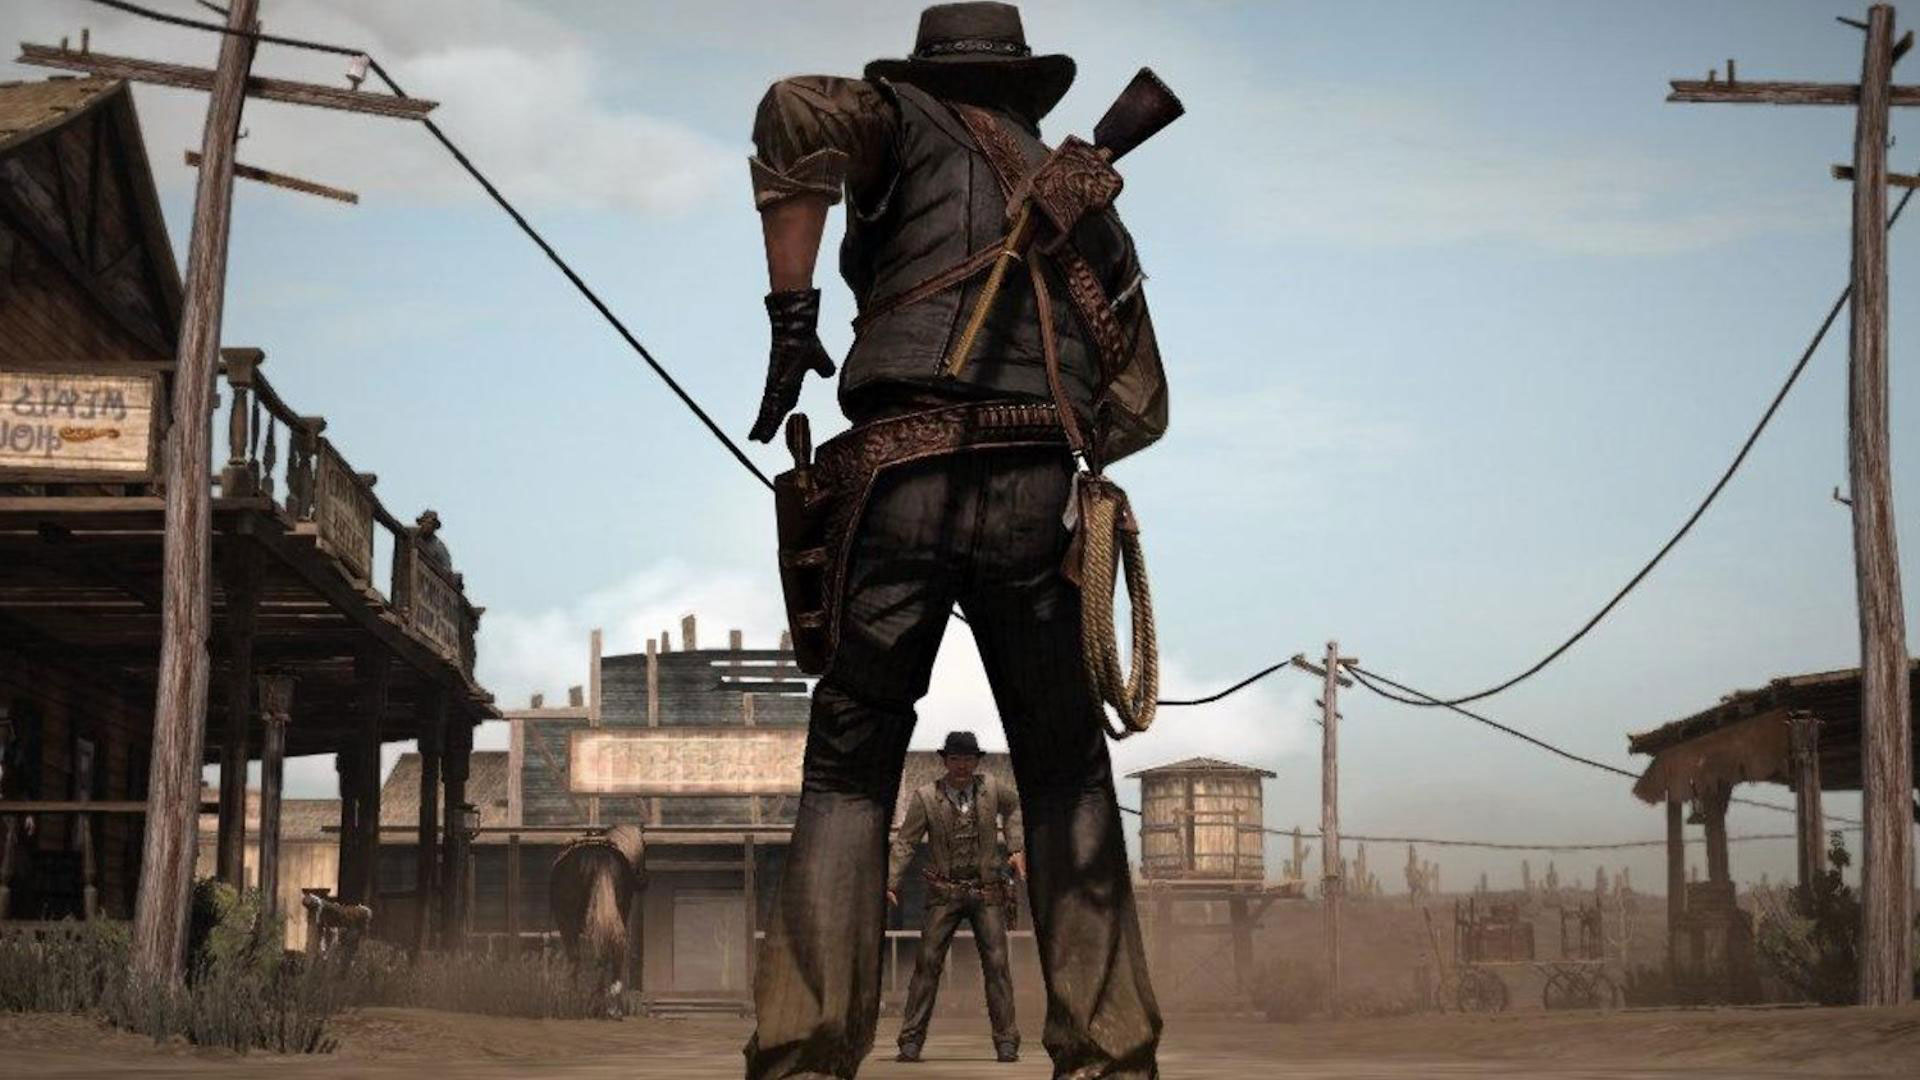 Red Dead Redemption 3 confirmed by Rockstar parent company 